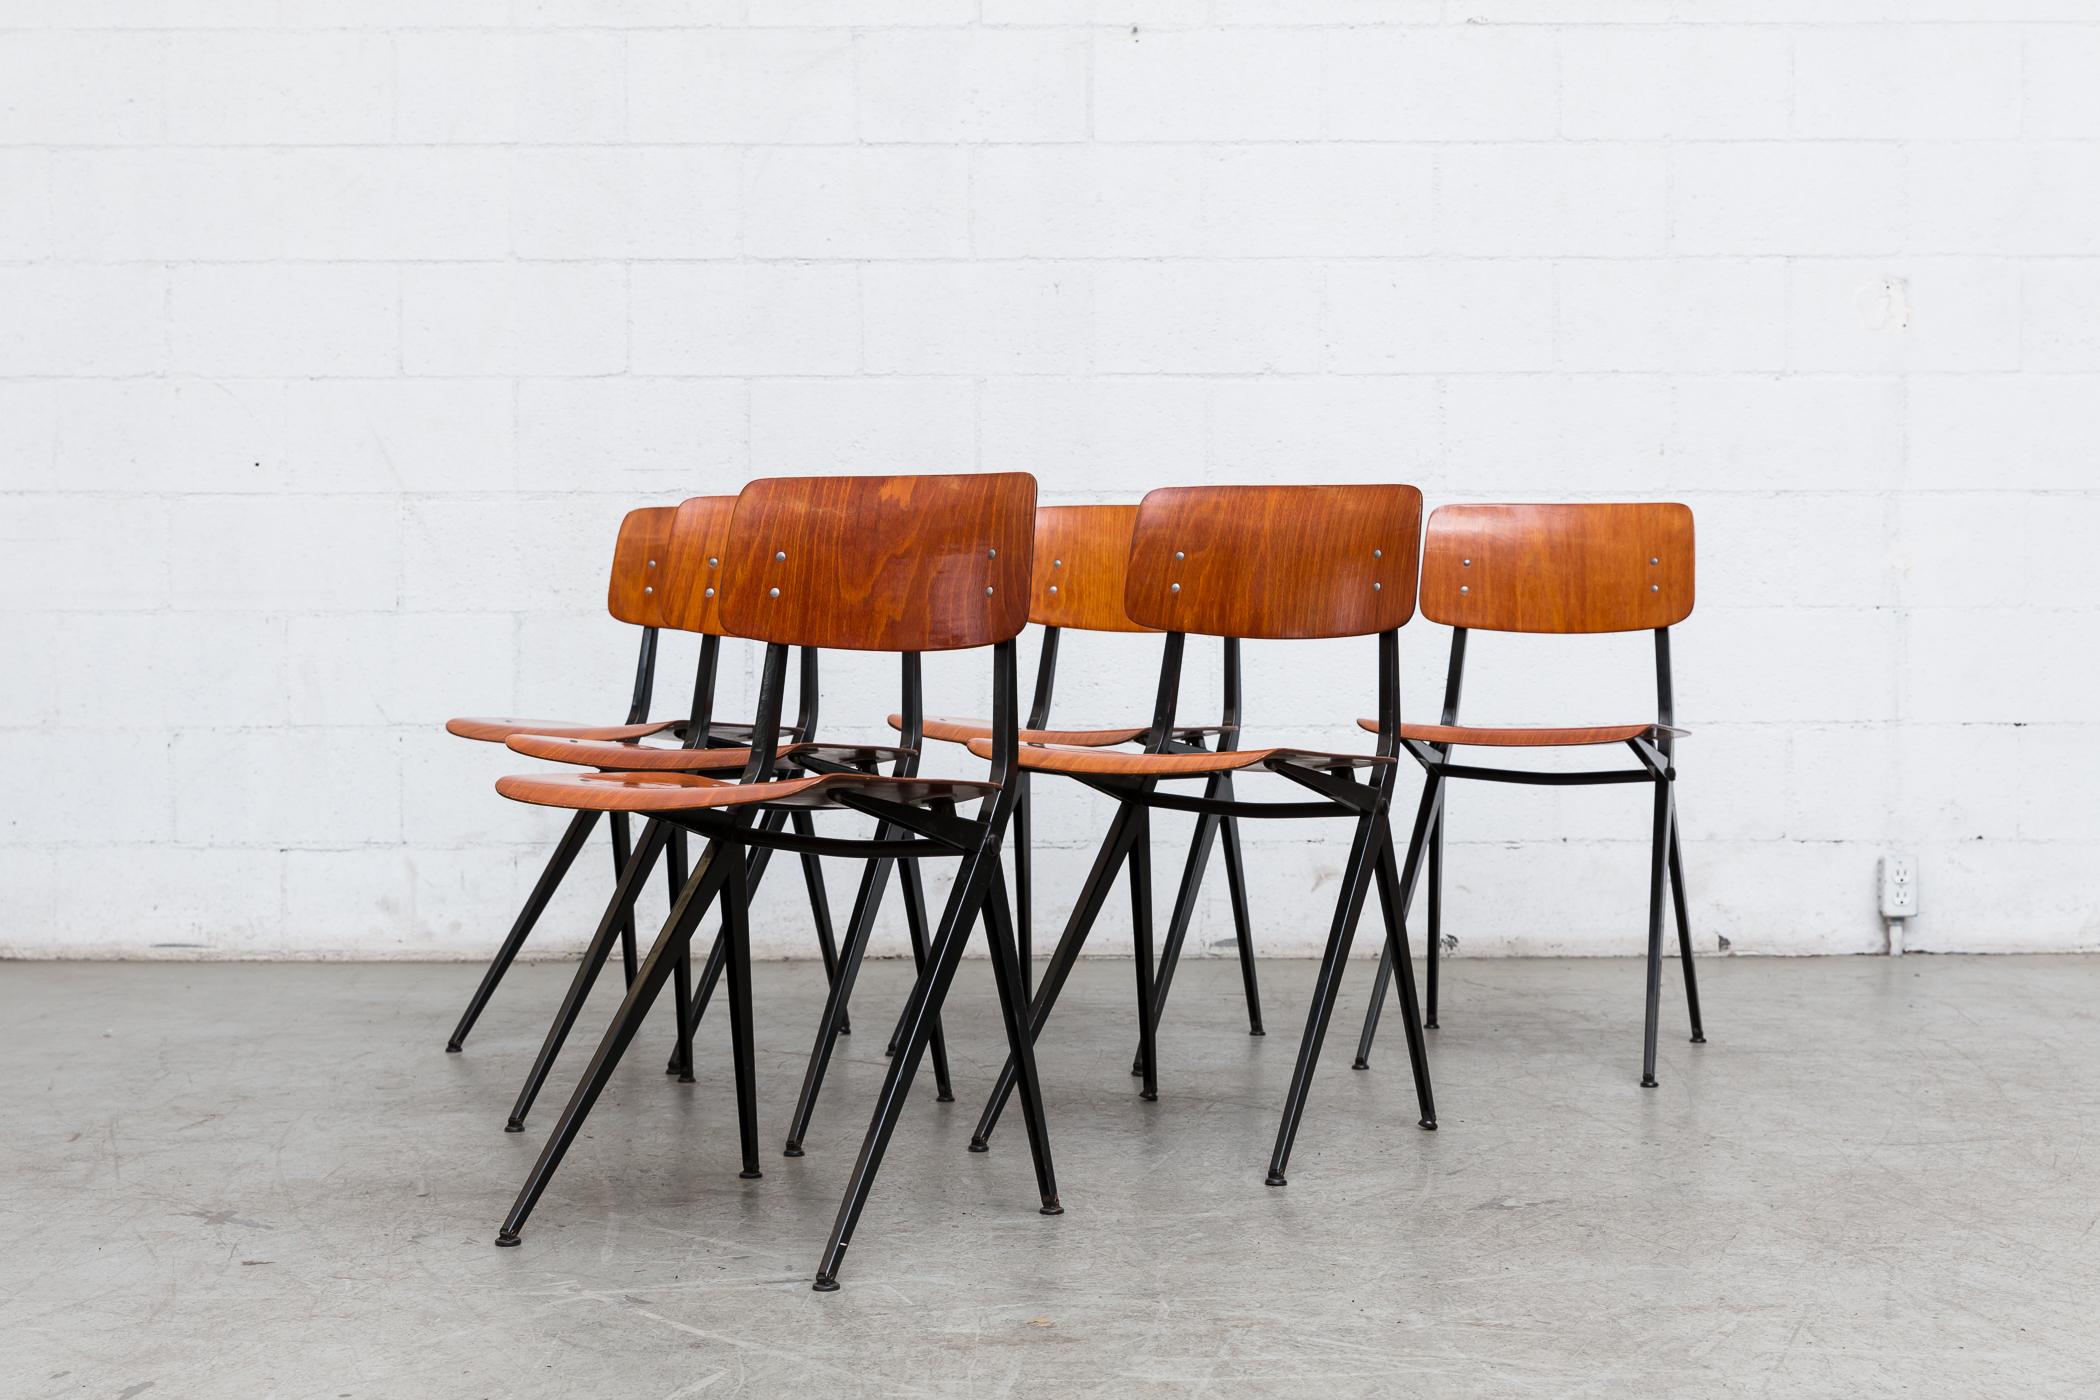 Rare Mid-Century resined teak non-stacking school chairs with Prouve style Compass Legs. These chairs have rich teak toned plywood seats and backs with folded black enameled sheet metal frames. These are in VERY Original Condiiton and Have Visible